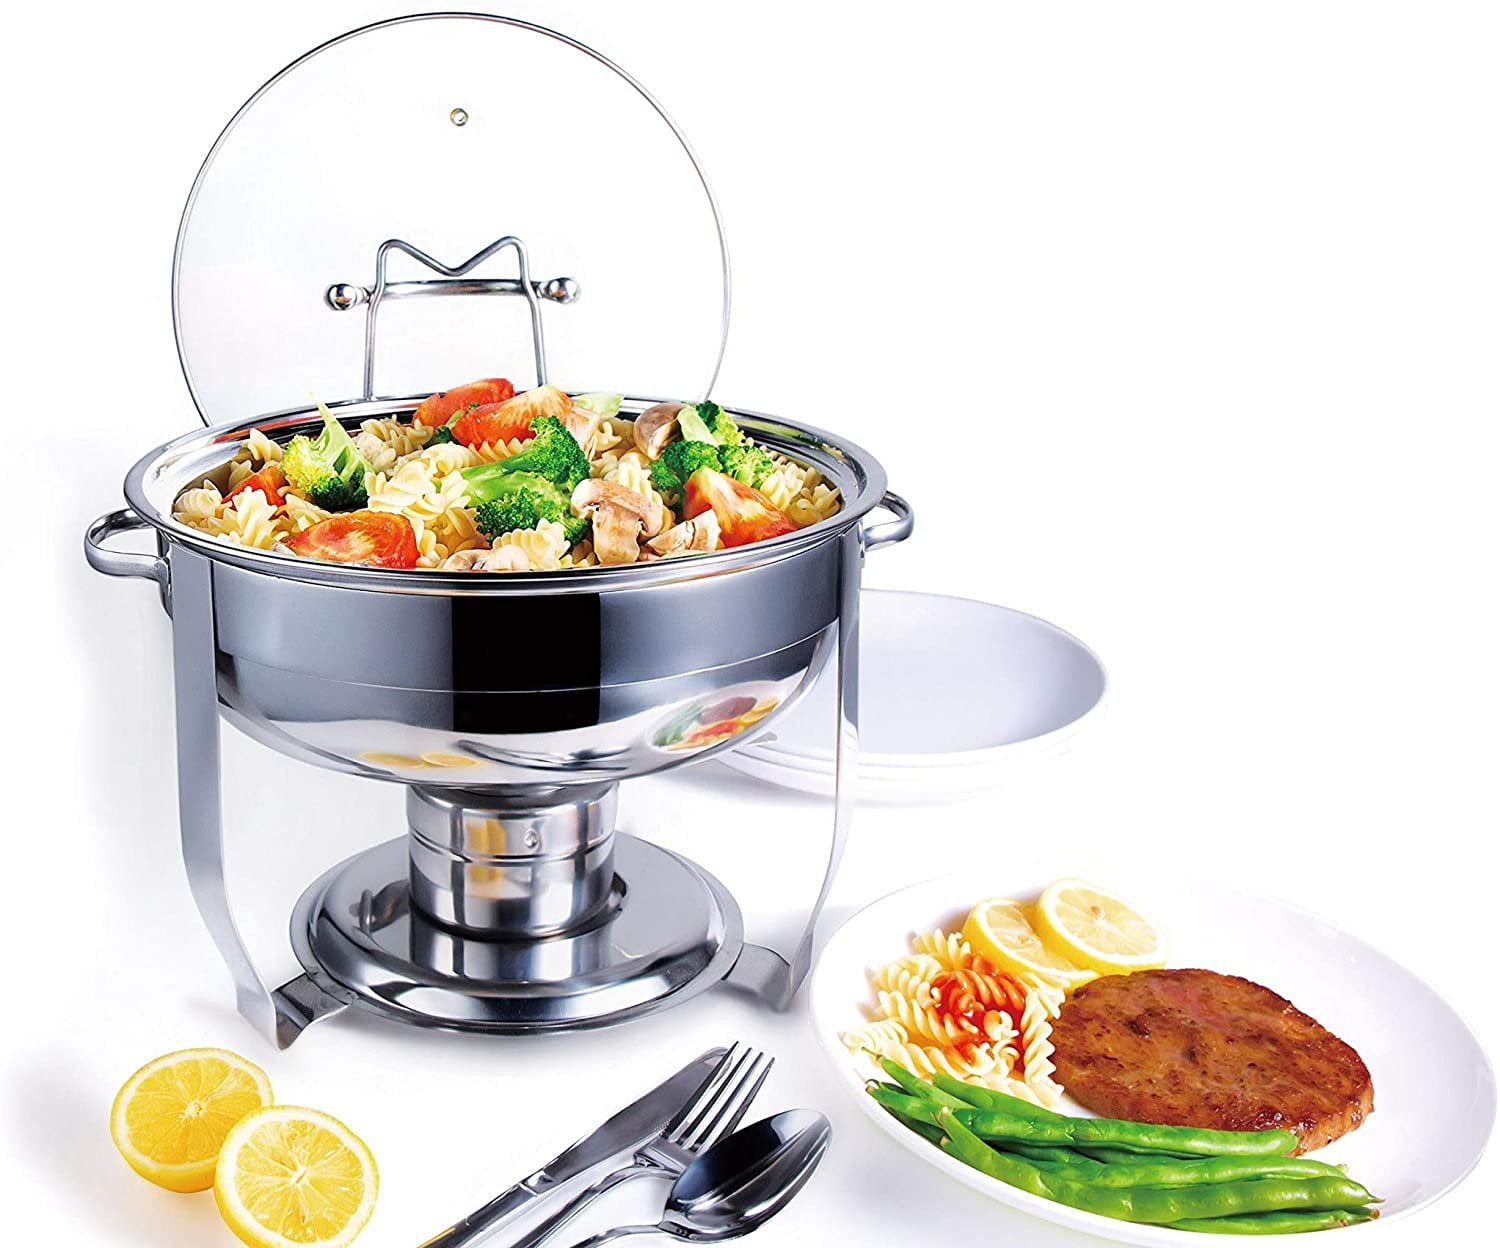 Galashield 4 qt Soup Warmer | Soup Tureen for Parties Buffet Stainless Steel Soup Chafer with Glass Serving Dish and Ladle, Silver, 4 Quart Soup Turee